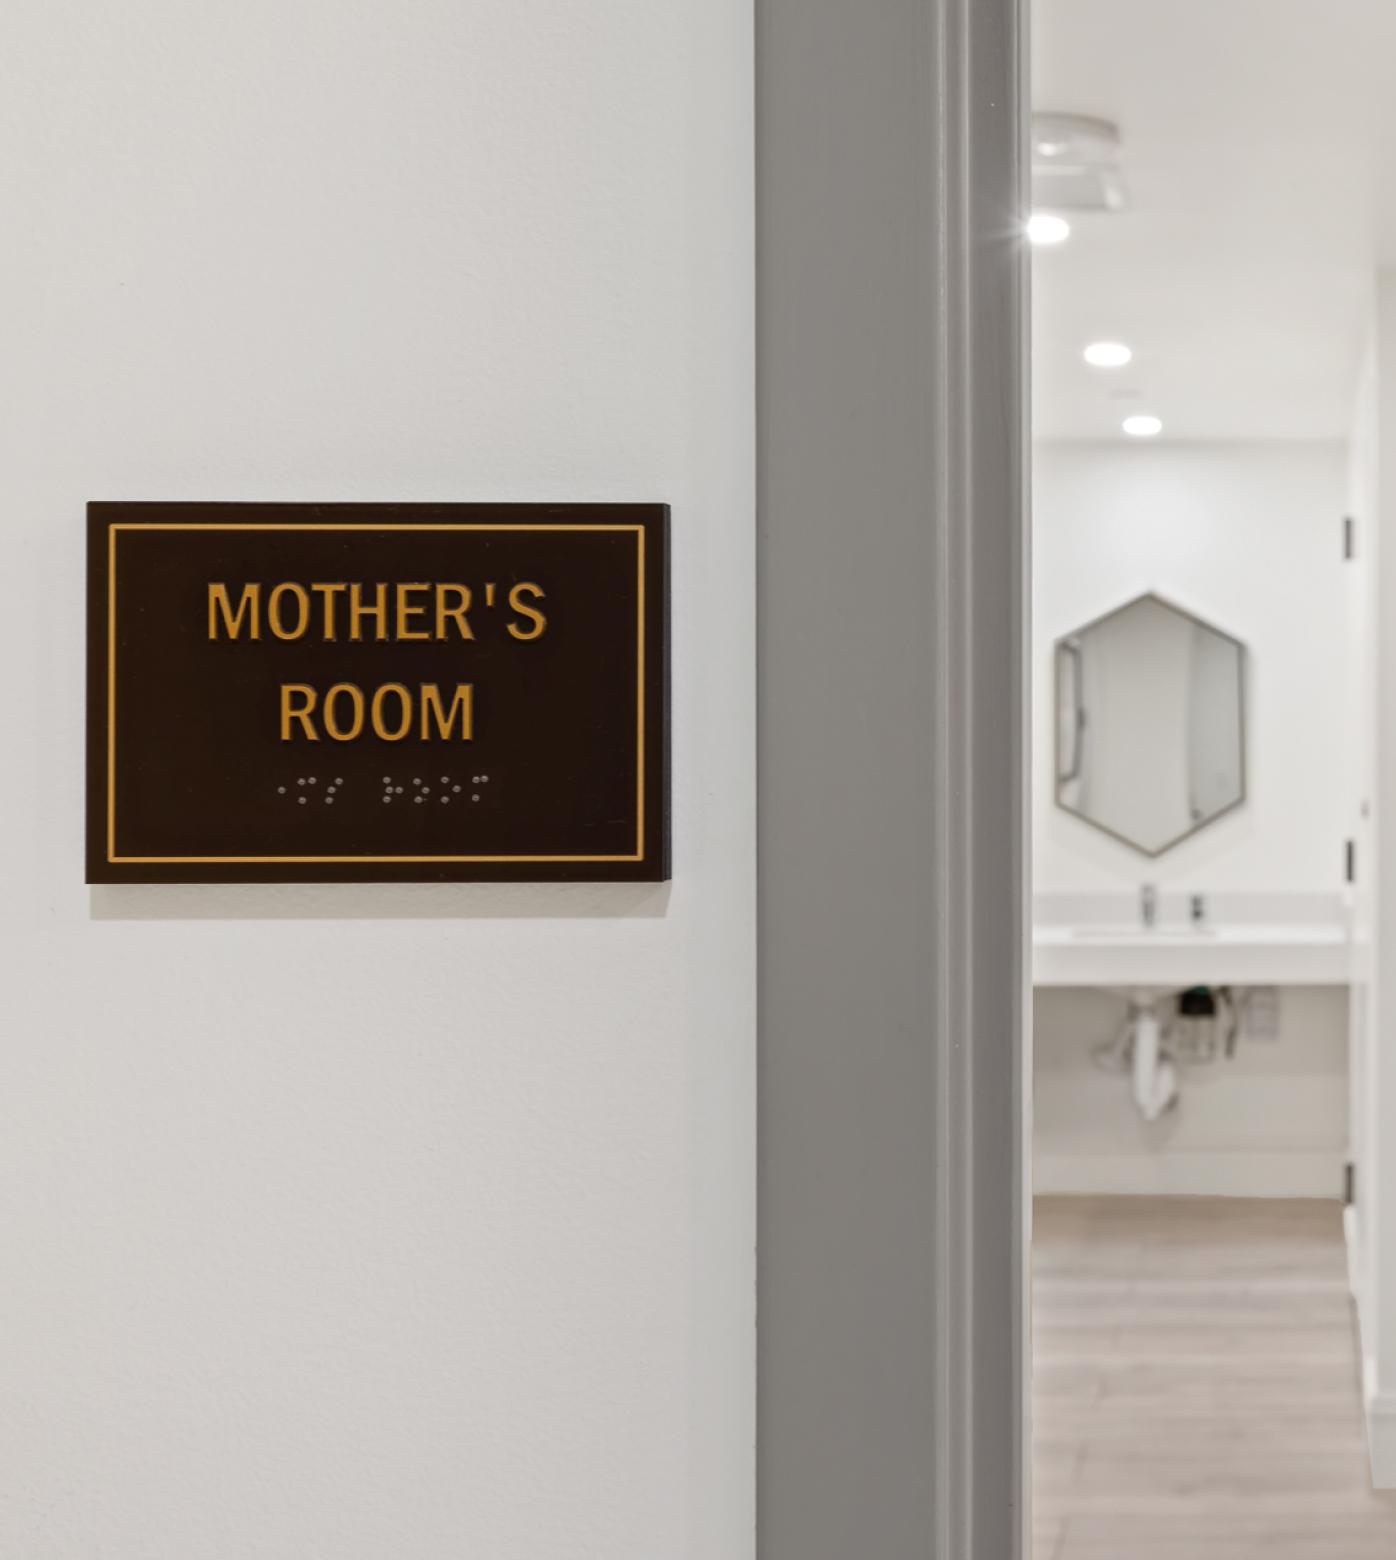 Mother's room entrance